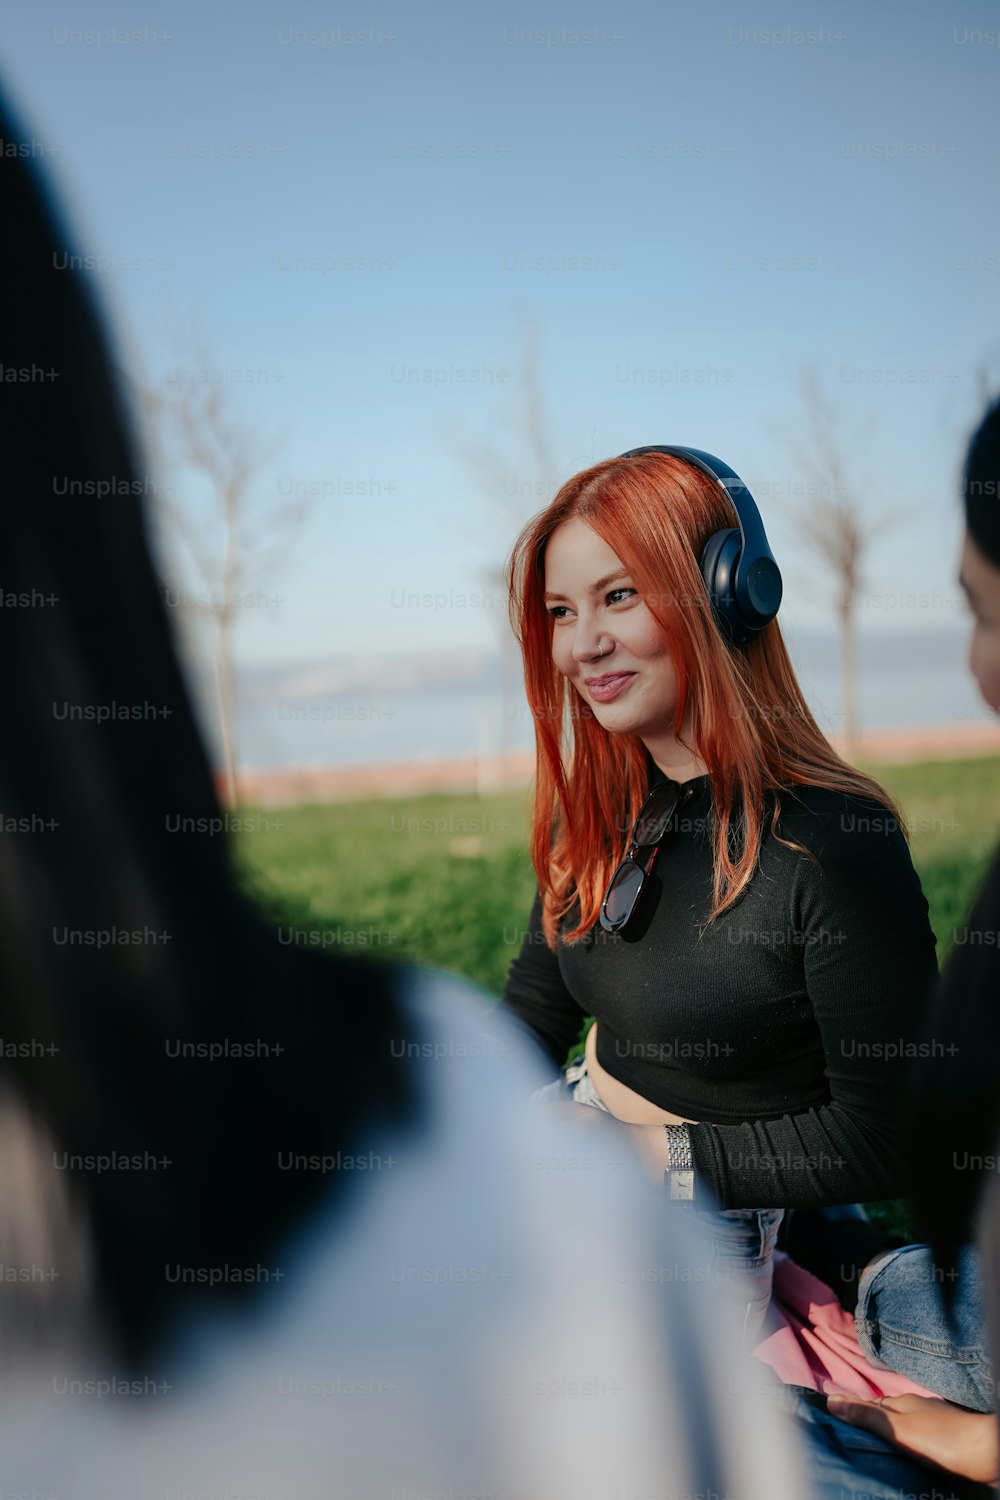 a woman with red hair wearing headphones